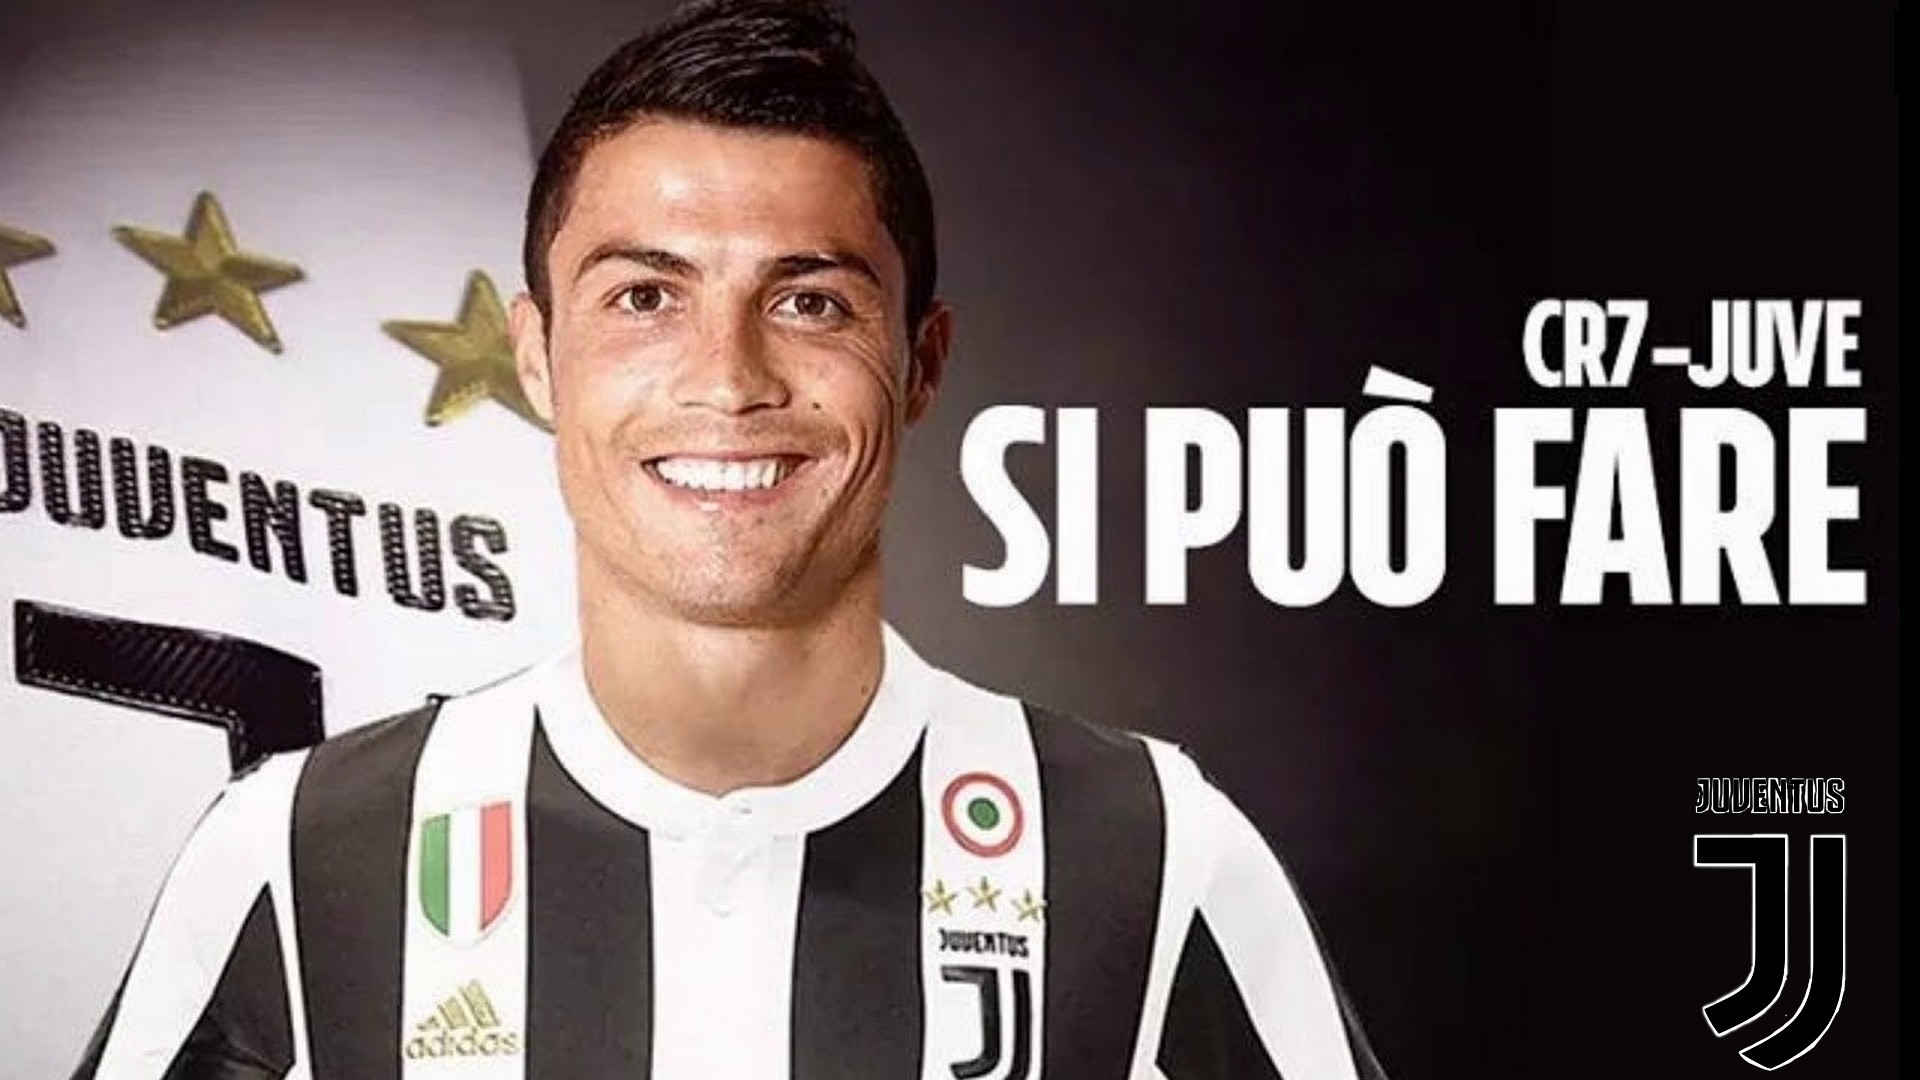 HD Desktop Wallpaper C Ronaldo Juventus With Resolution 1920X1080 pixel. You can make this wallpaper for your Mac or Windows Desktop Background, iPhone, Android or Tablet and another Smartphone device for free